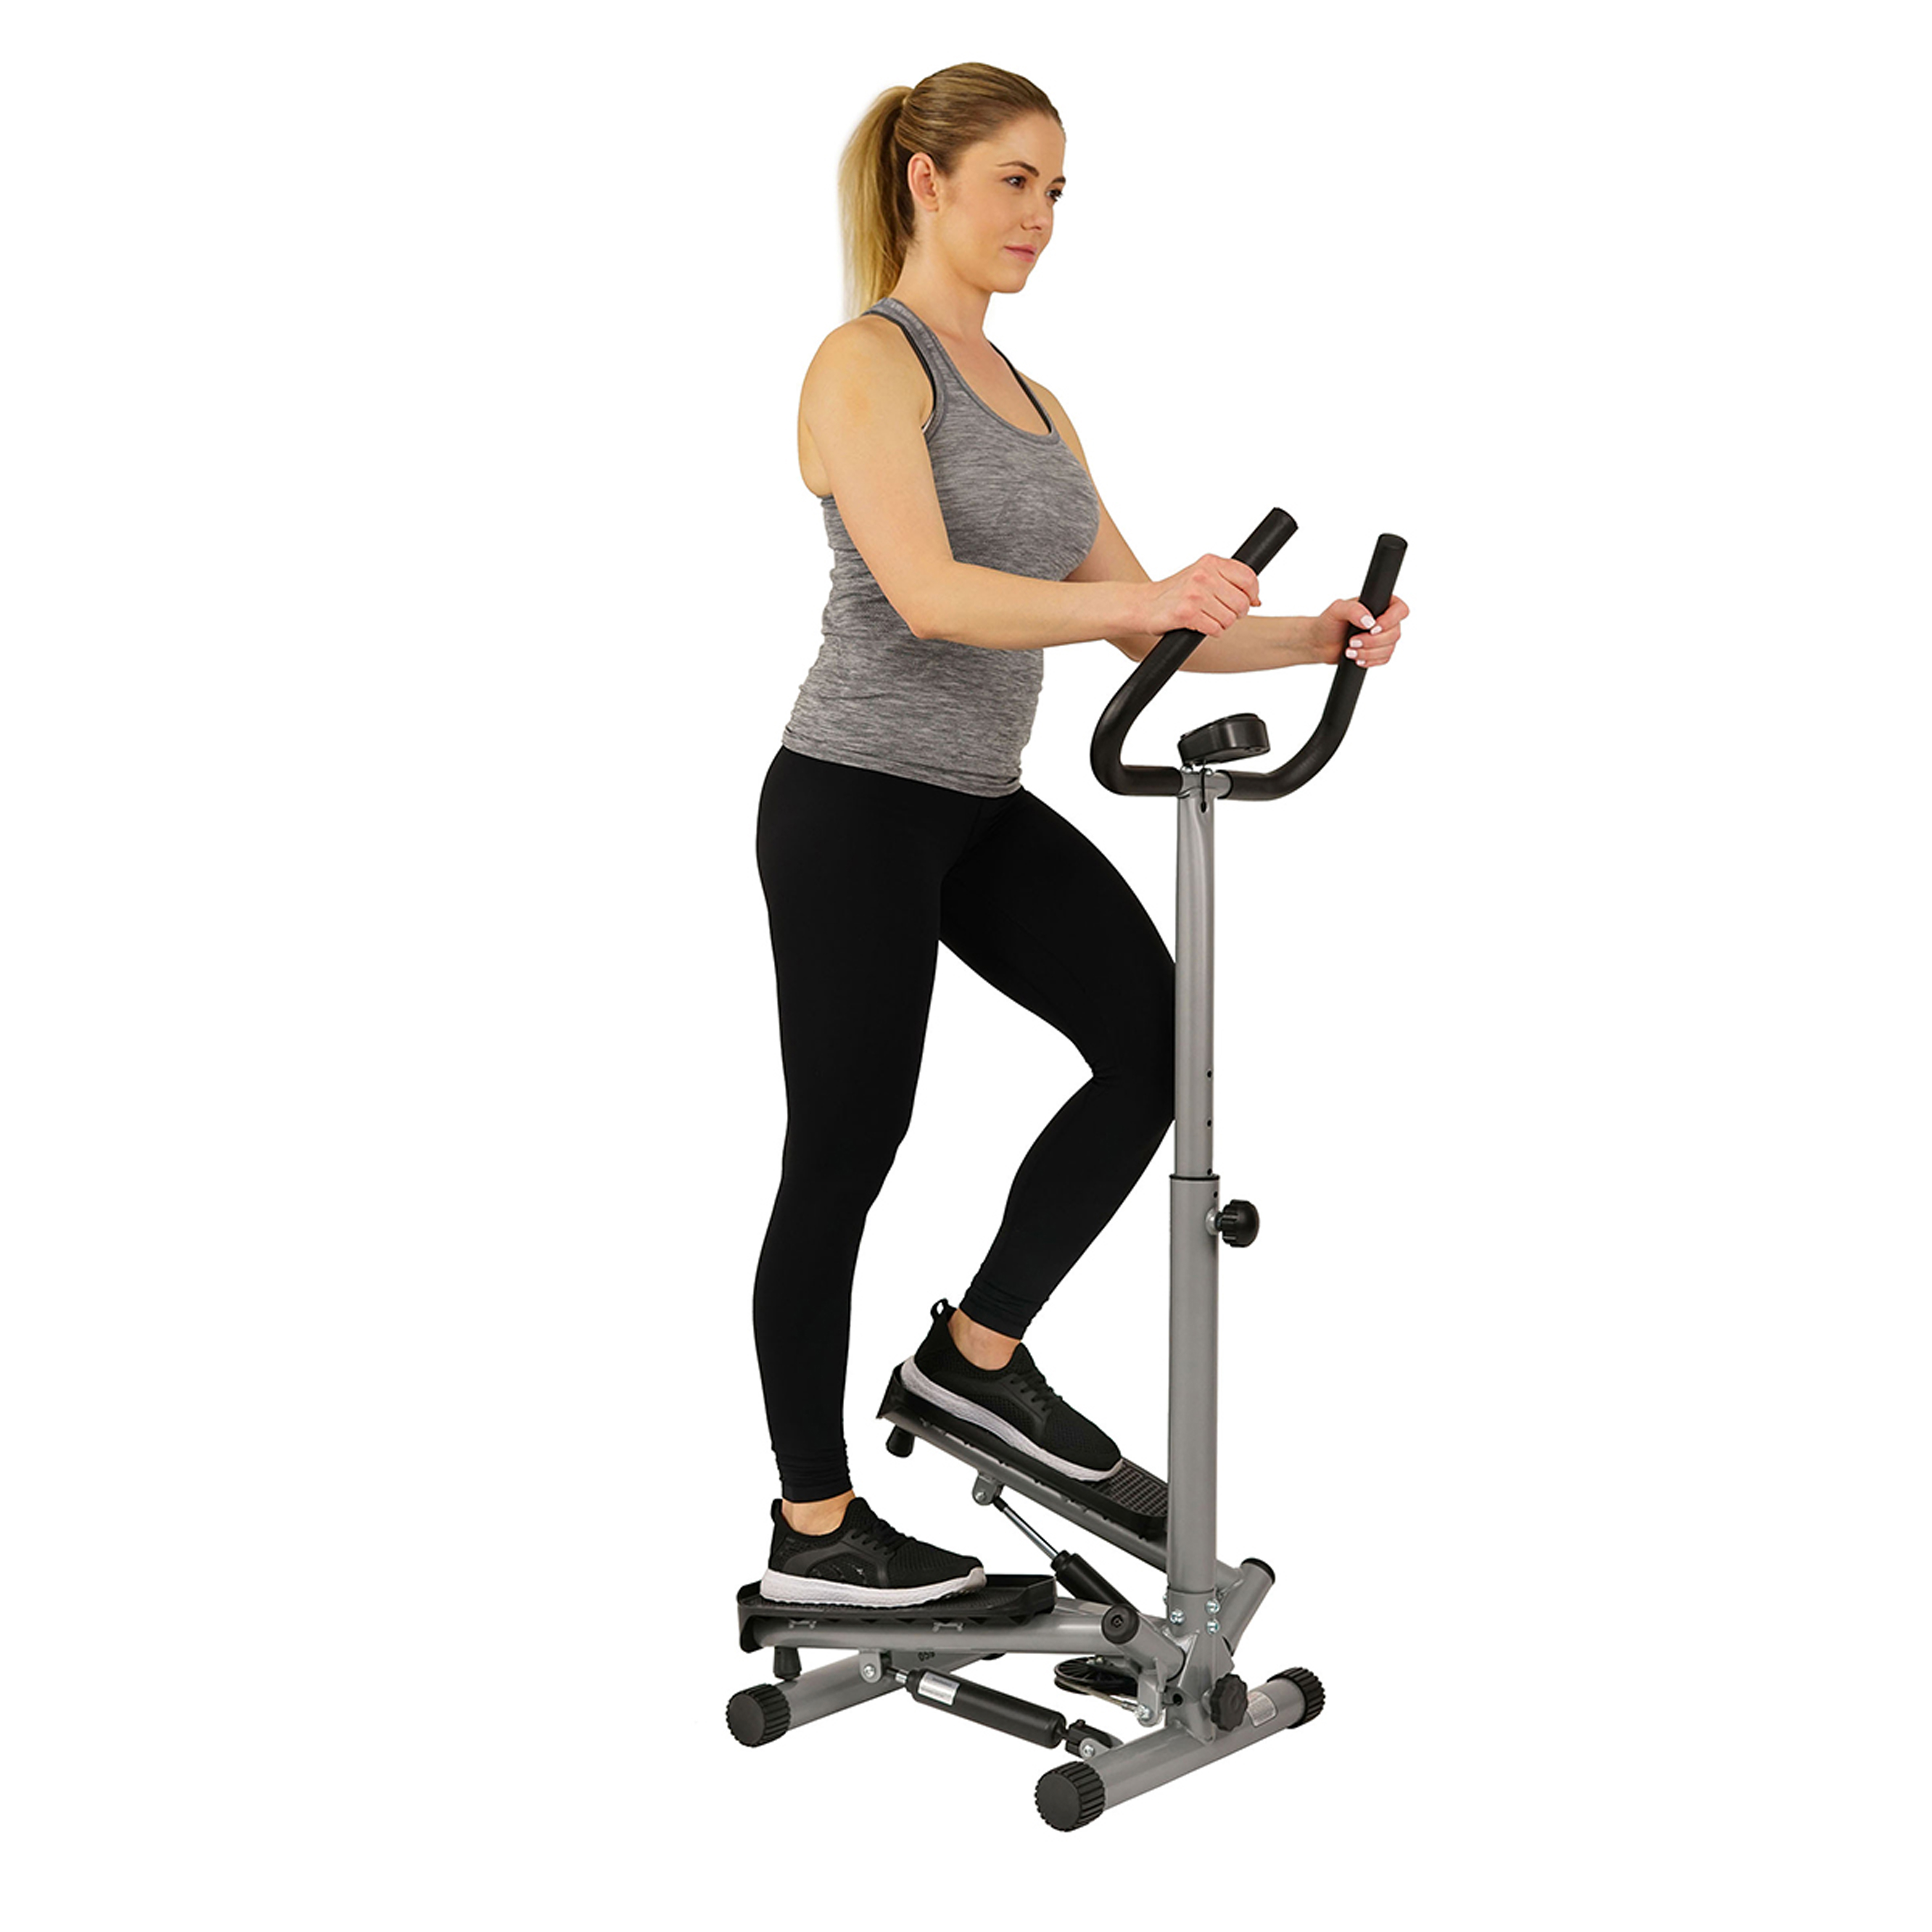 Sunny Health & Fitness Twist Stair Stepper Machine with Handlebar for Total Body Toning and LCD Monitor, NO. 059 - image 1 of 12